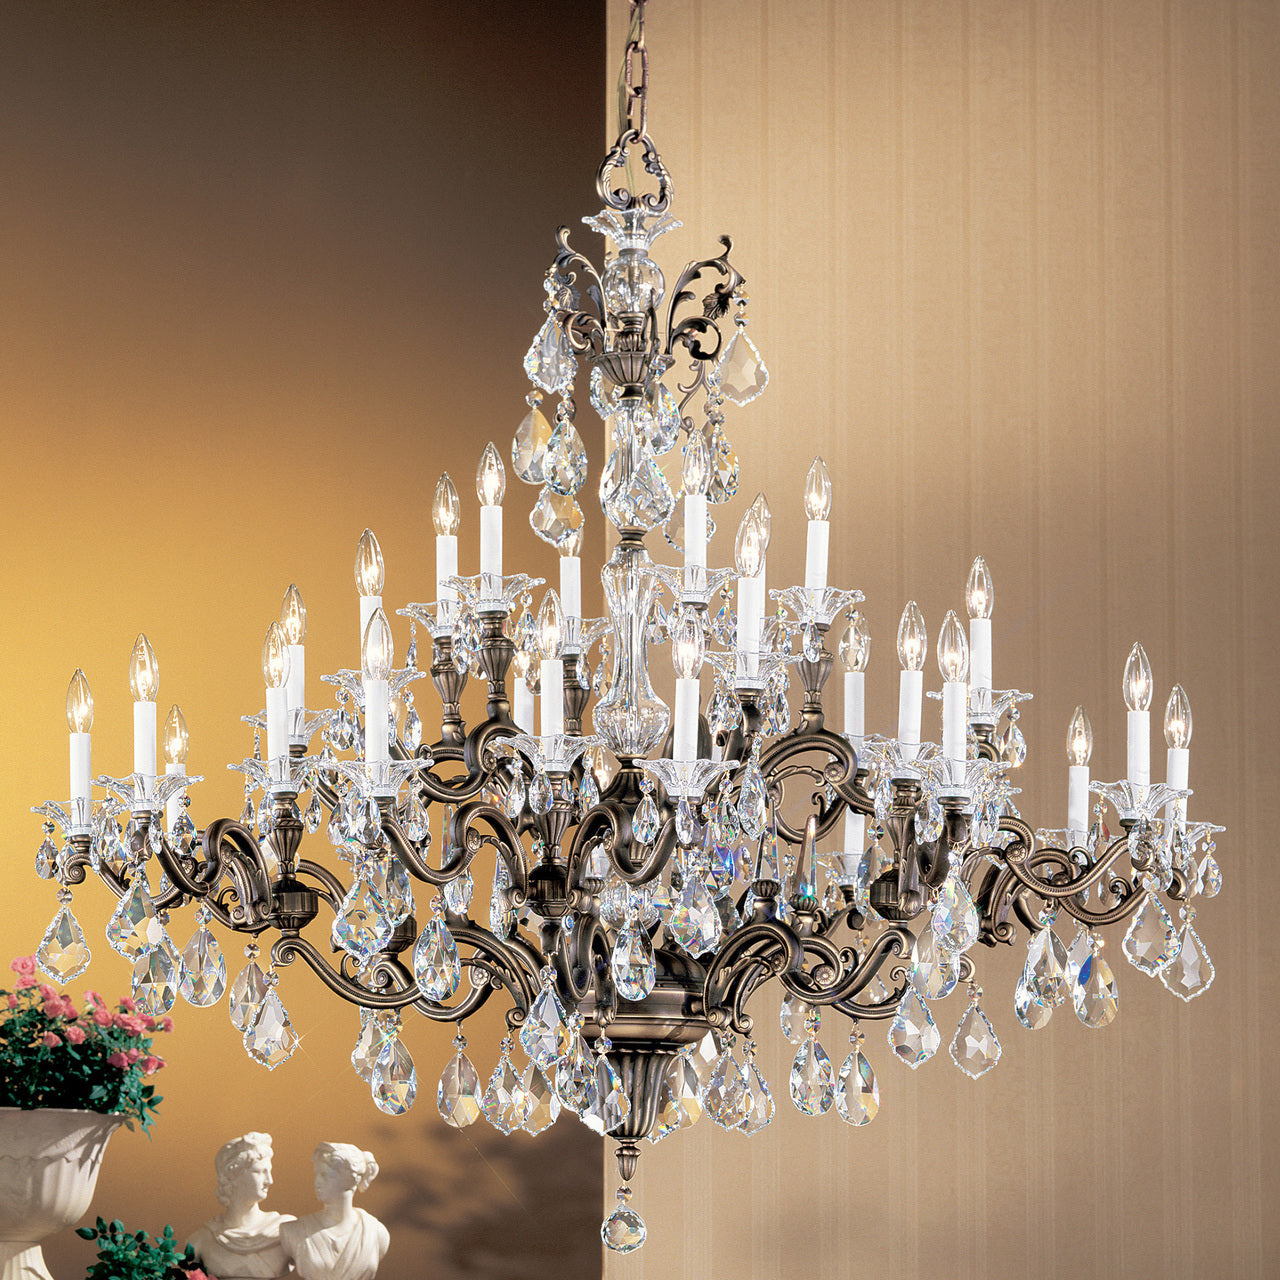 Classic Lighting 57130 RB S Via Firenze Crystal Chandelier in Roman Bronze (Imported from Spain)